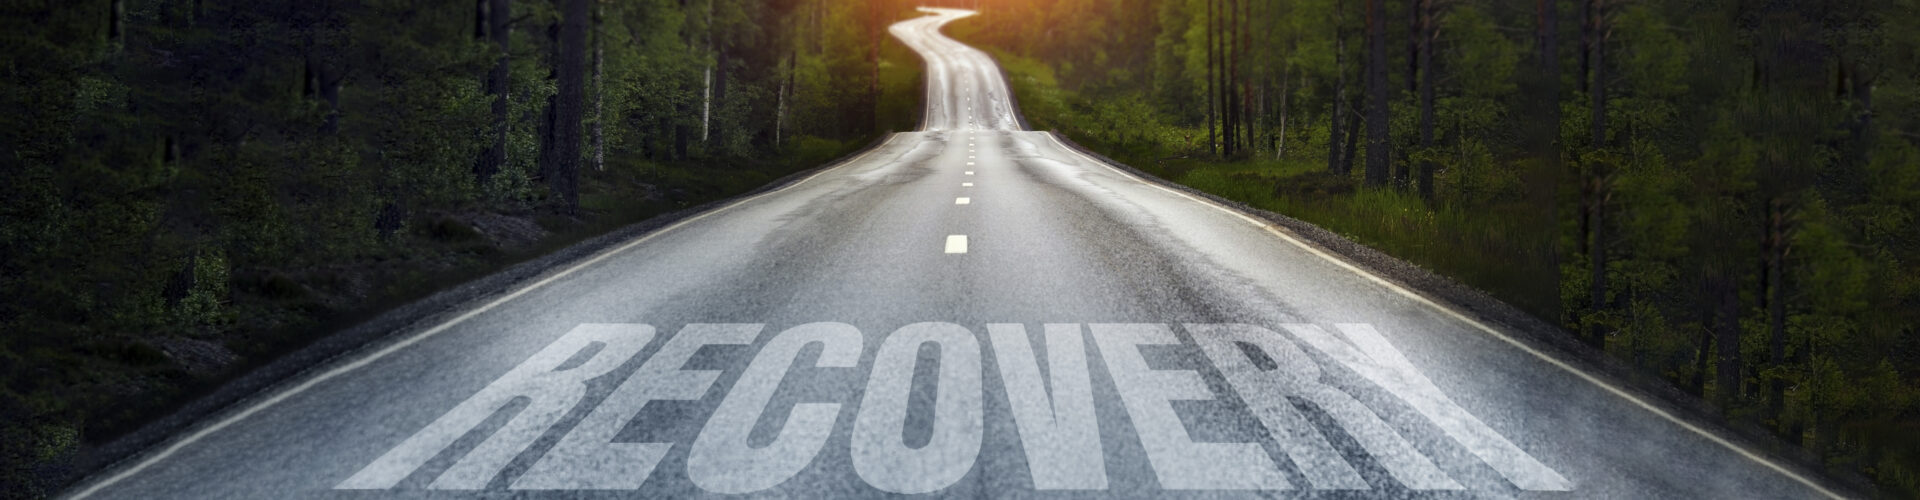 picture of a road going off to the horizon with the word recovery written on it